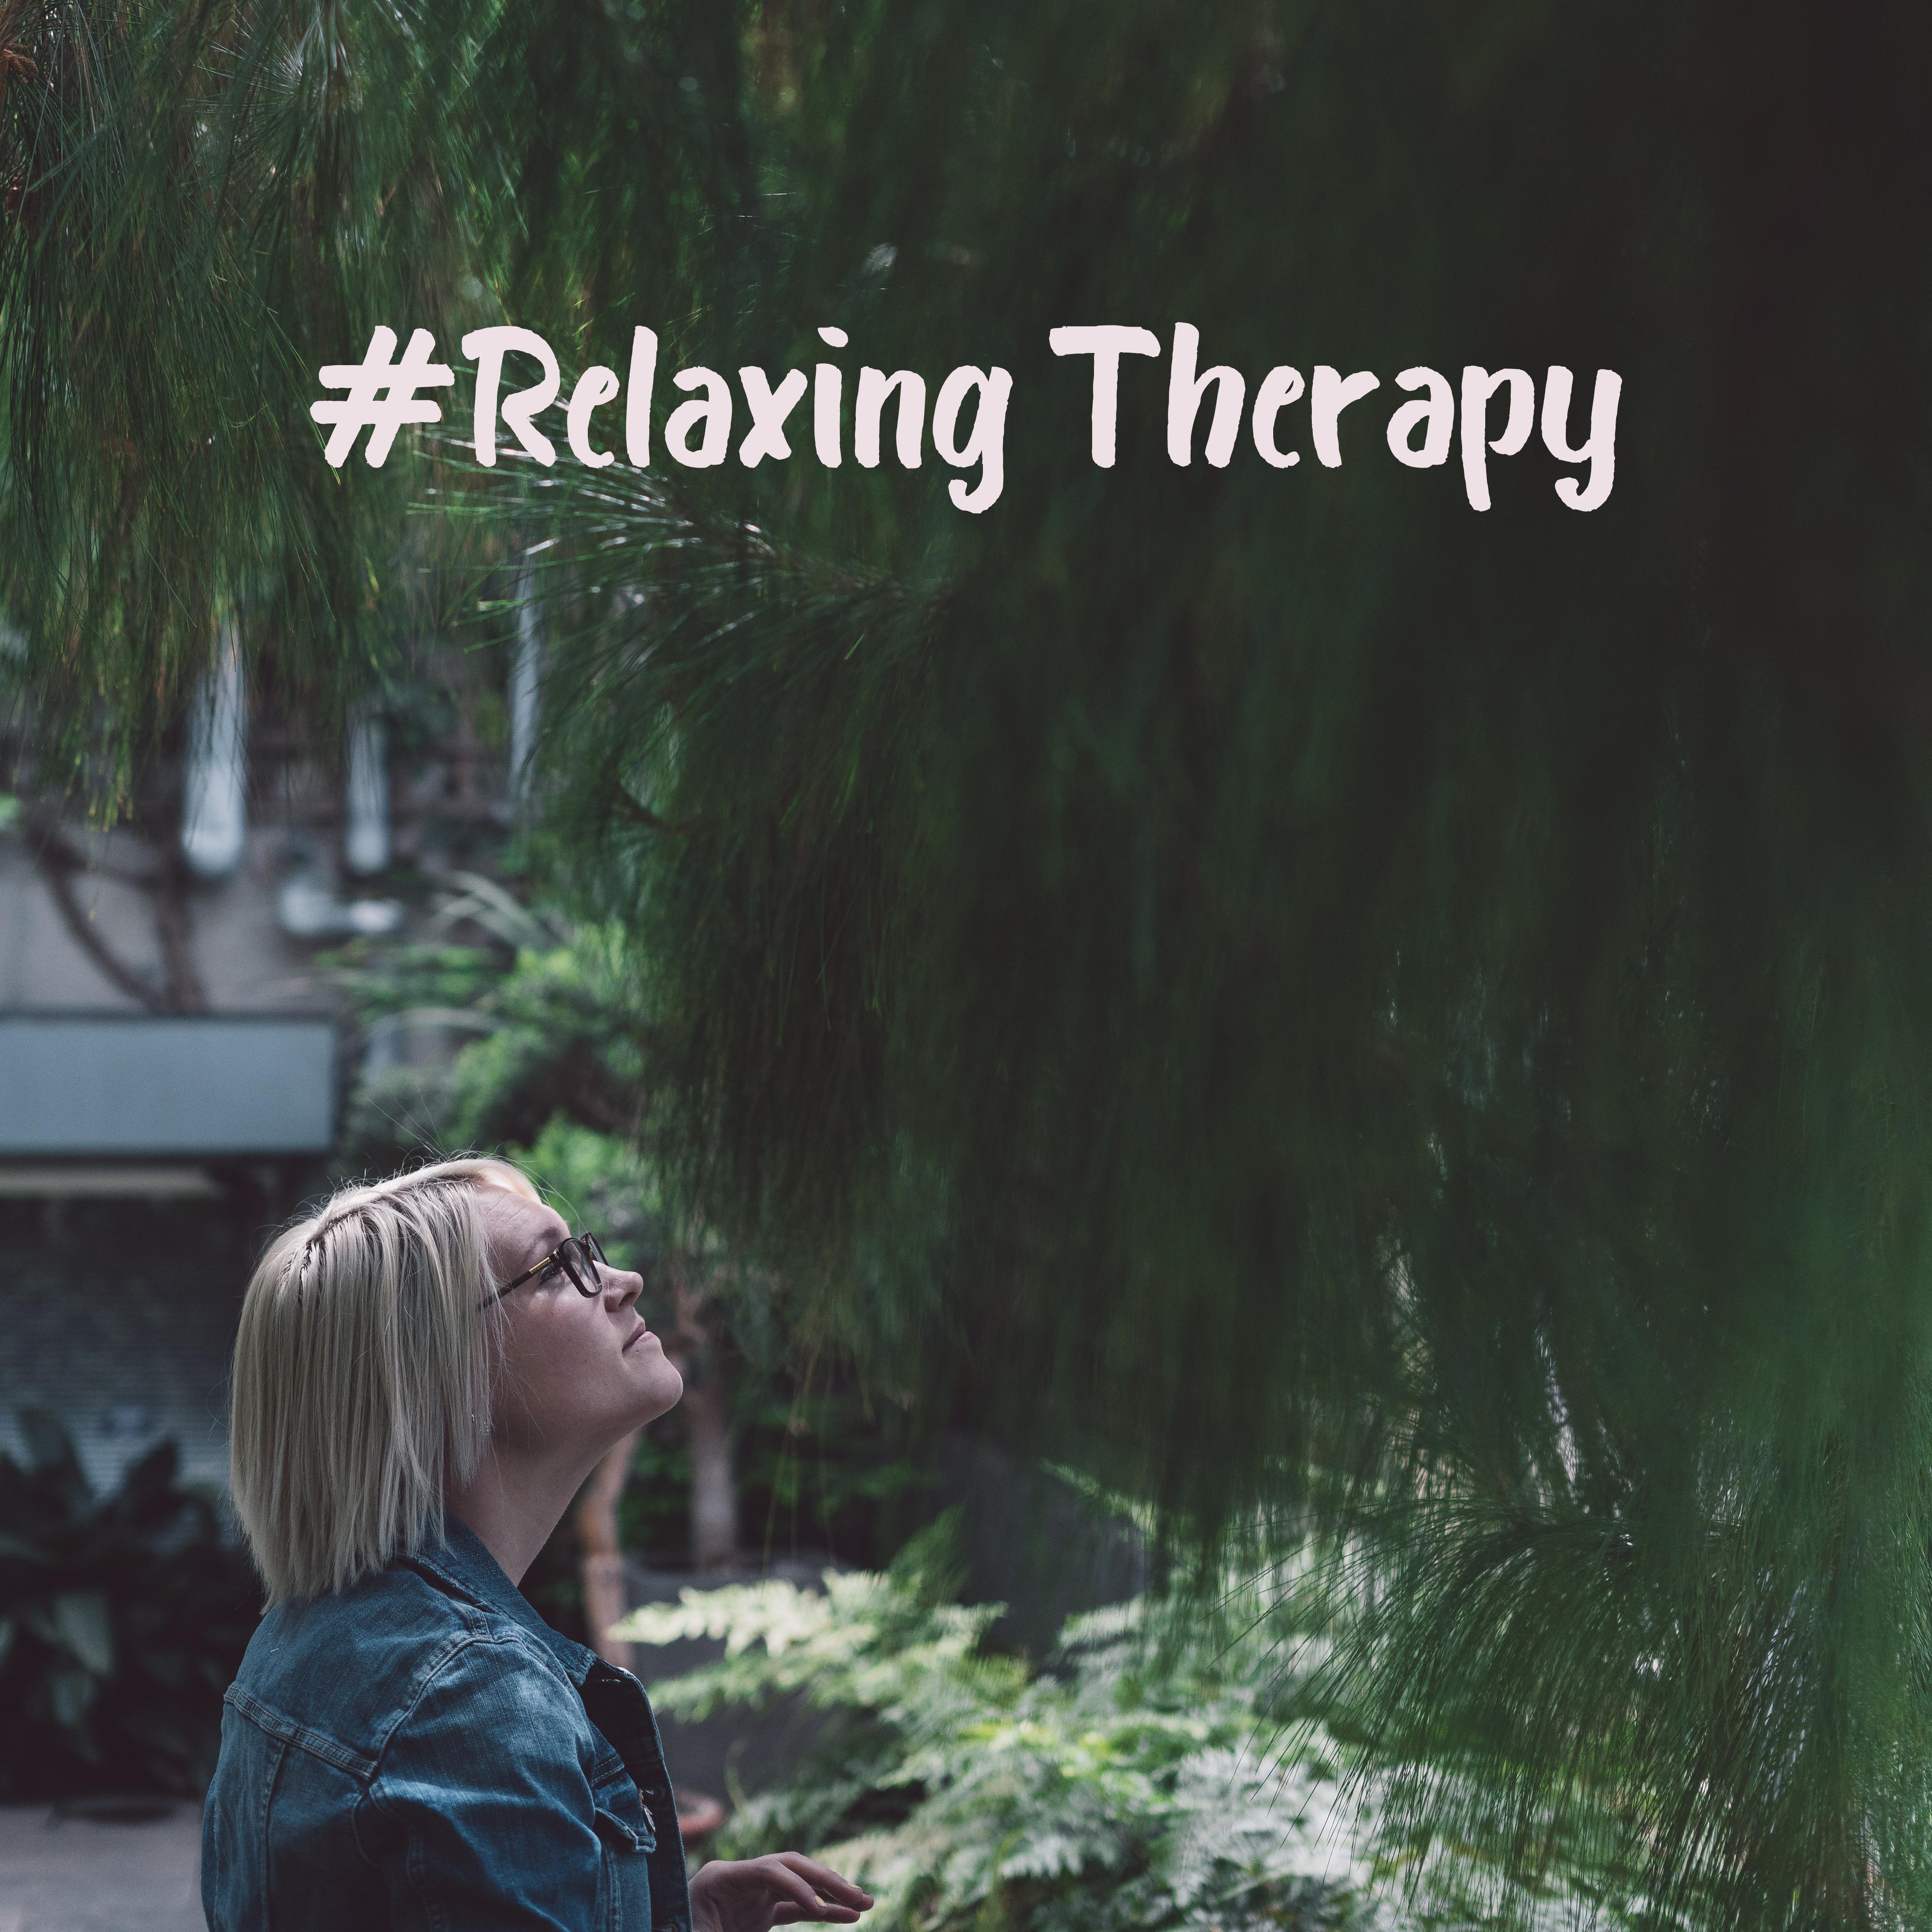 #Relaxing Therapy